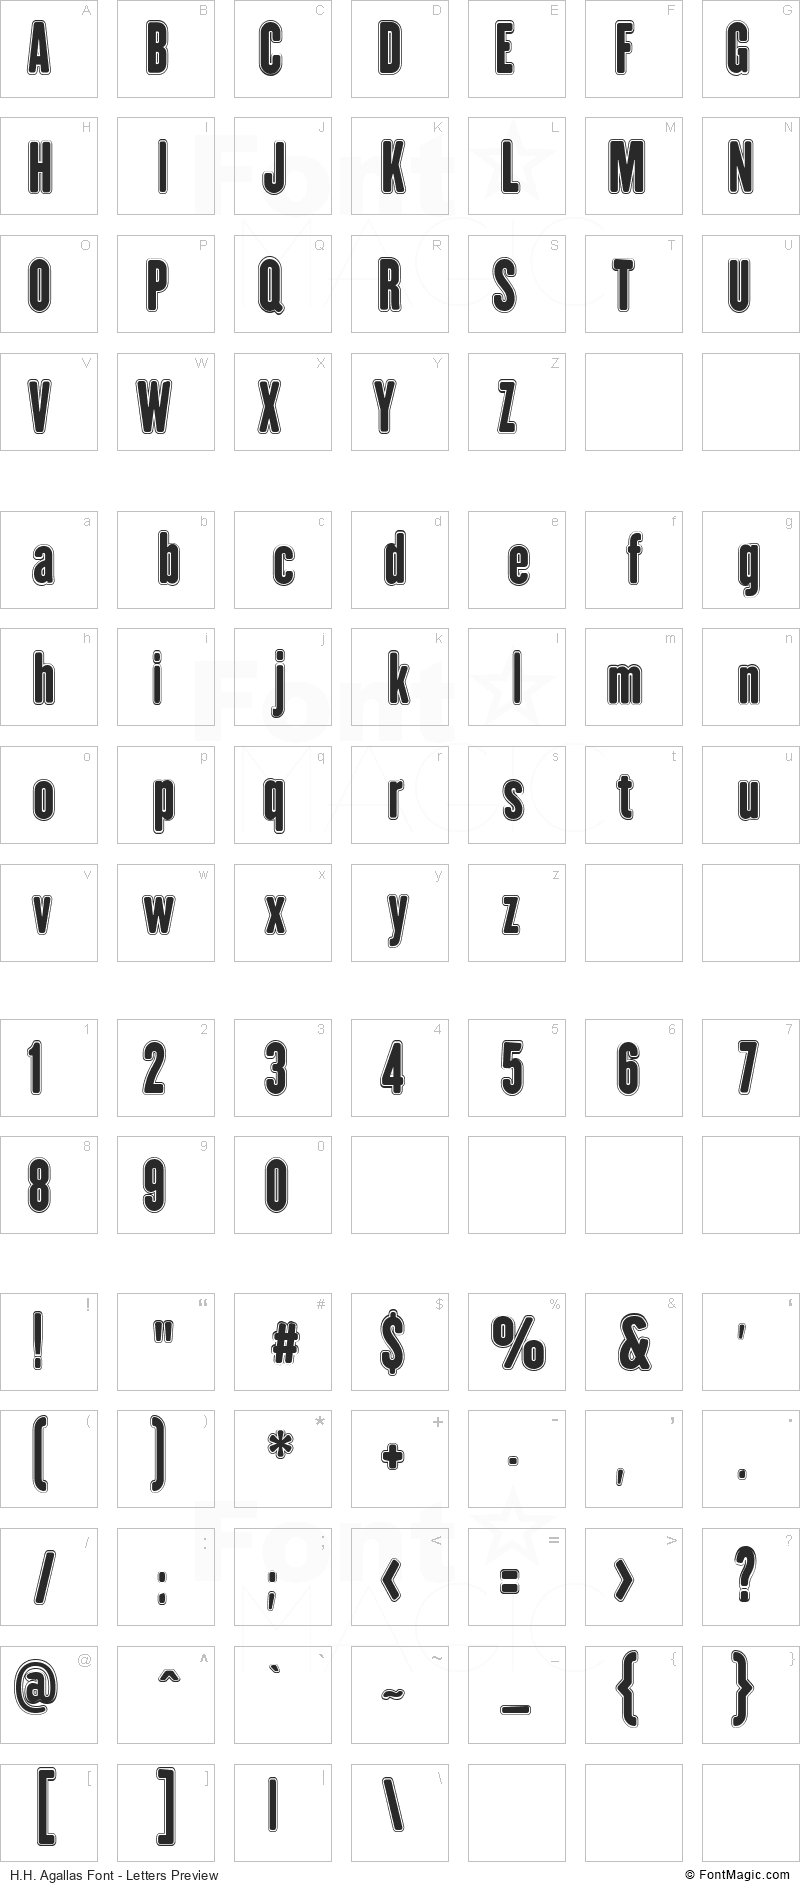 H.H. Agallas Font - All Latters Preview Chart